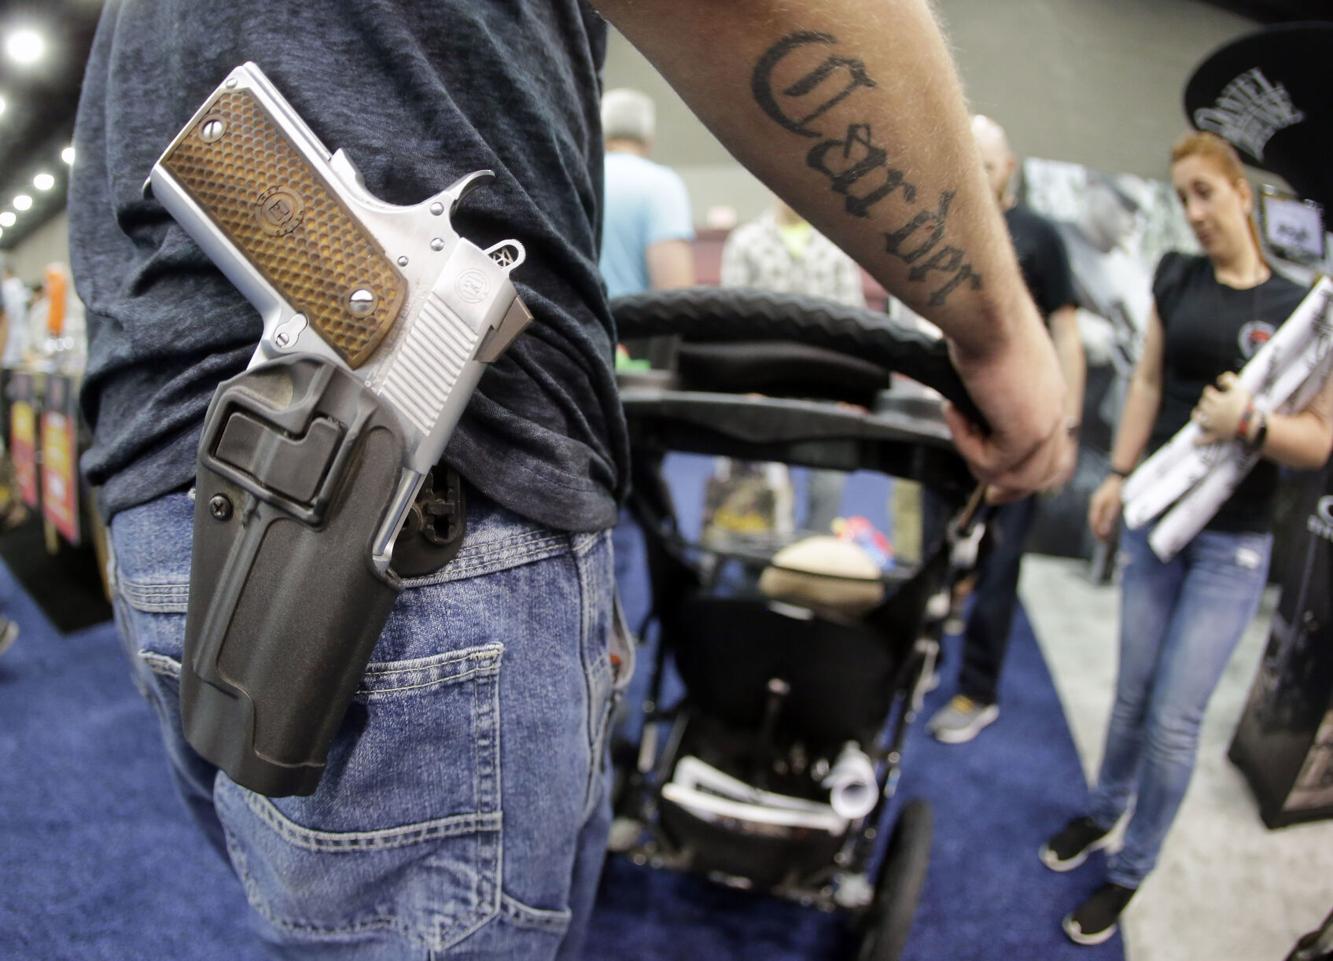 Editorial SC opencarry gun bill starts bad, gets worse. Some want to